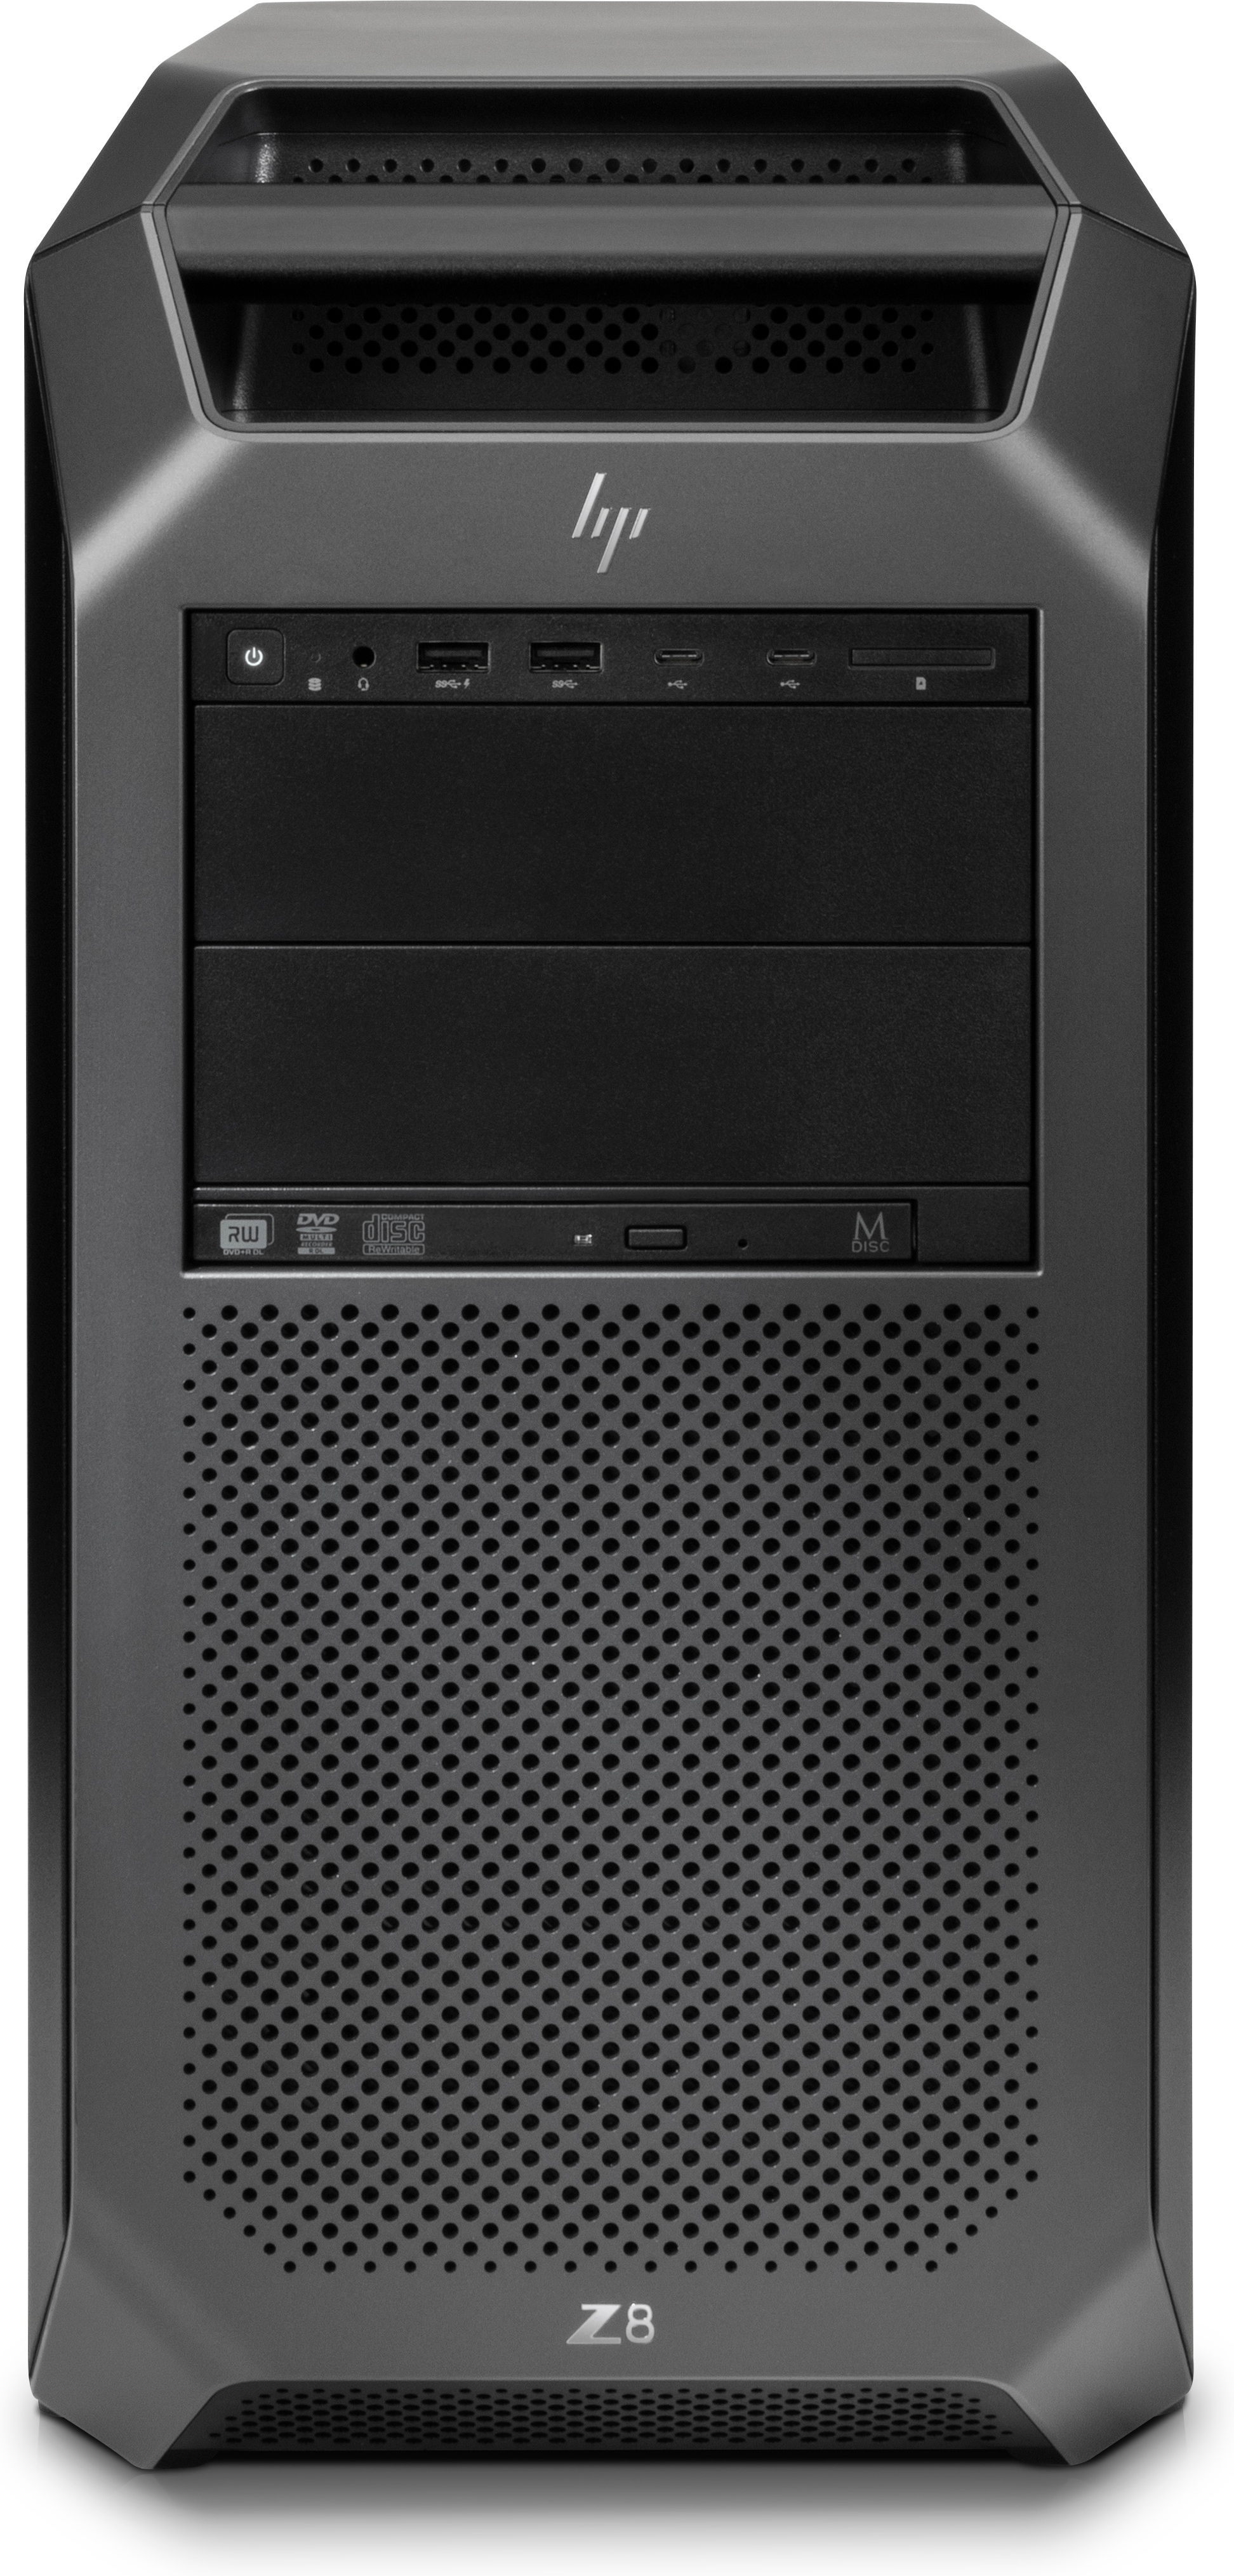 HP Workstation Z8 G4 Tower - Data Science